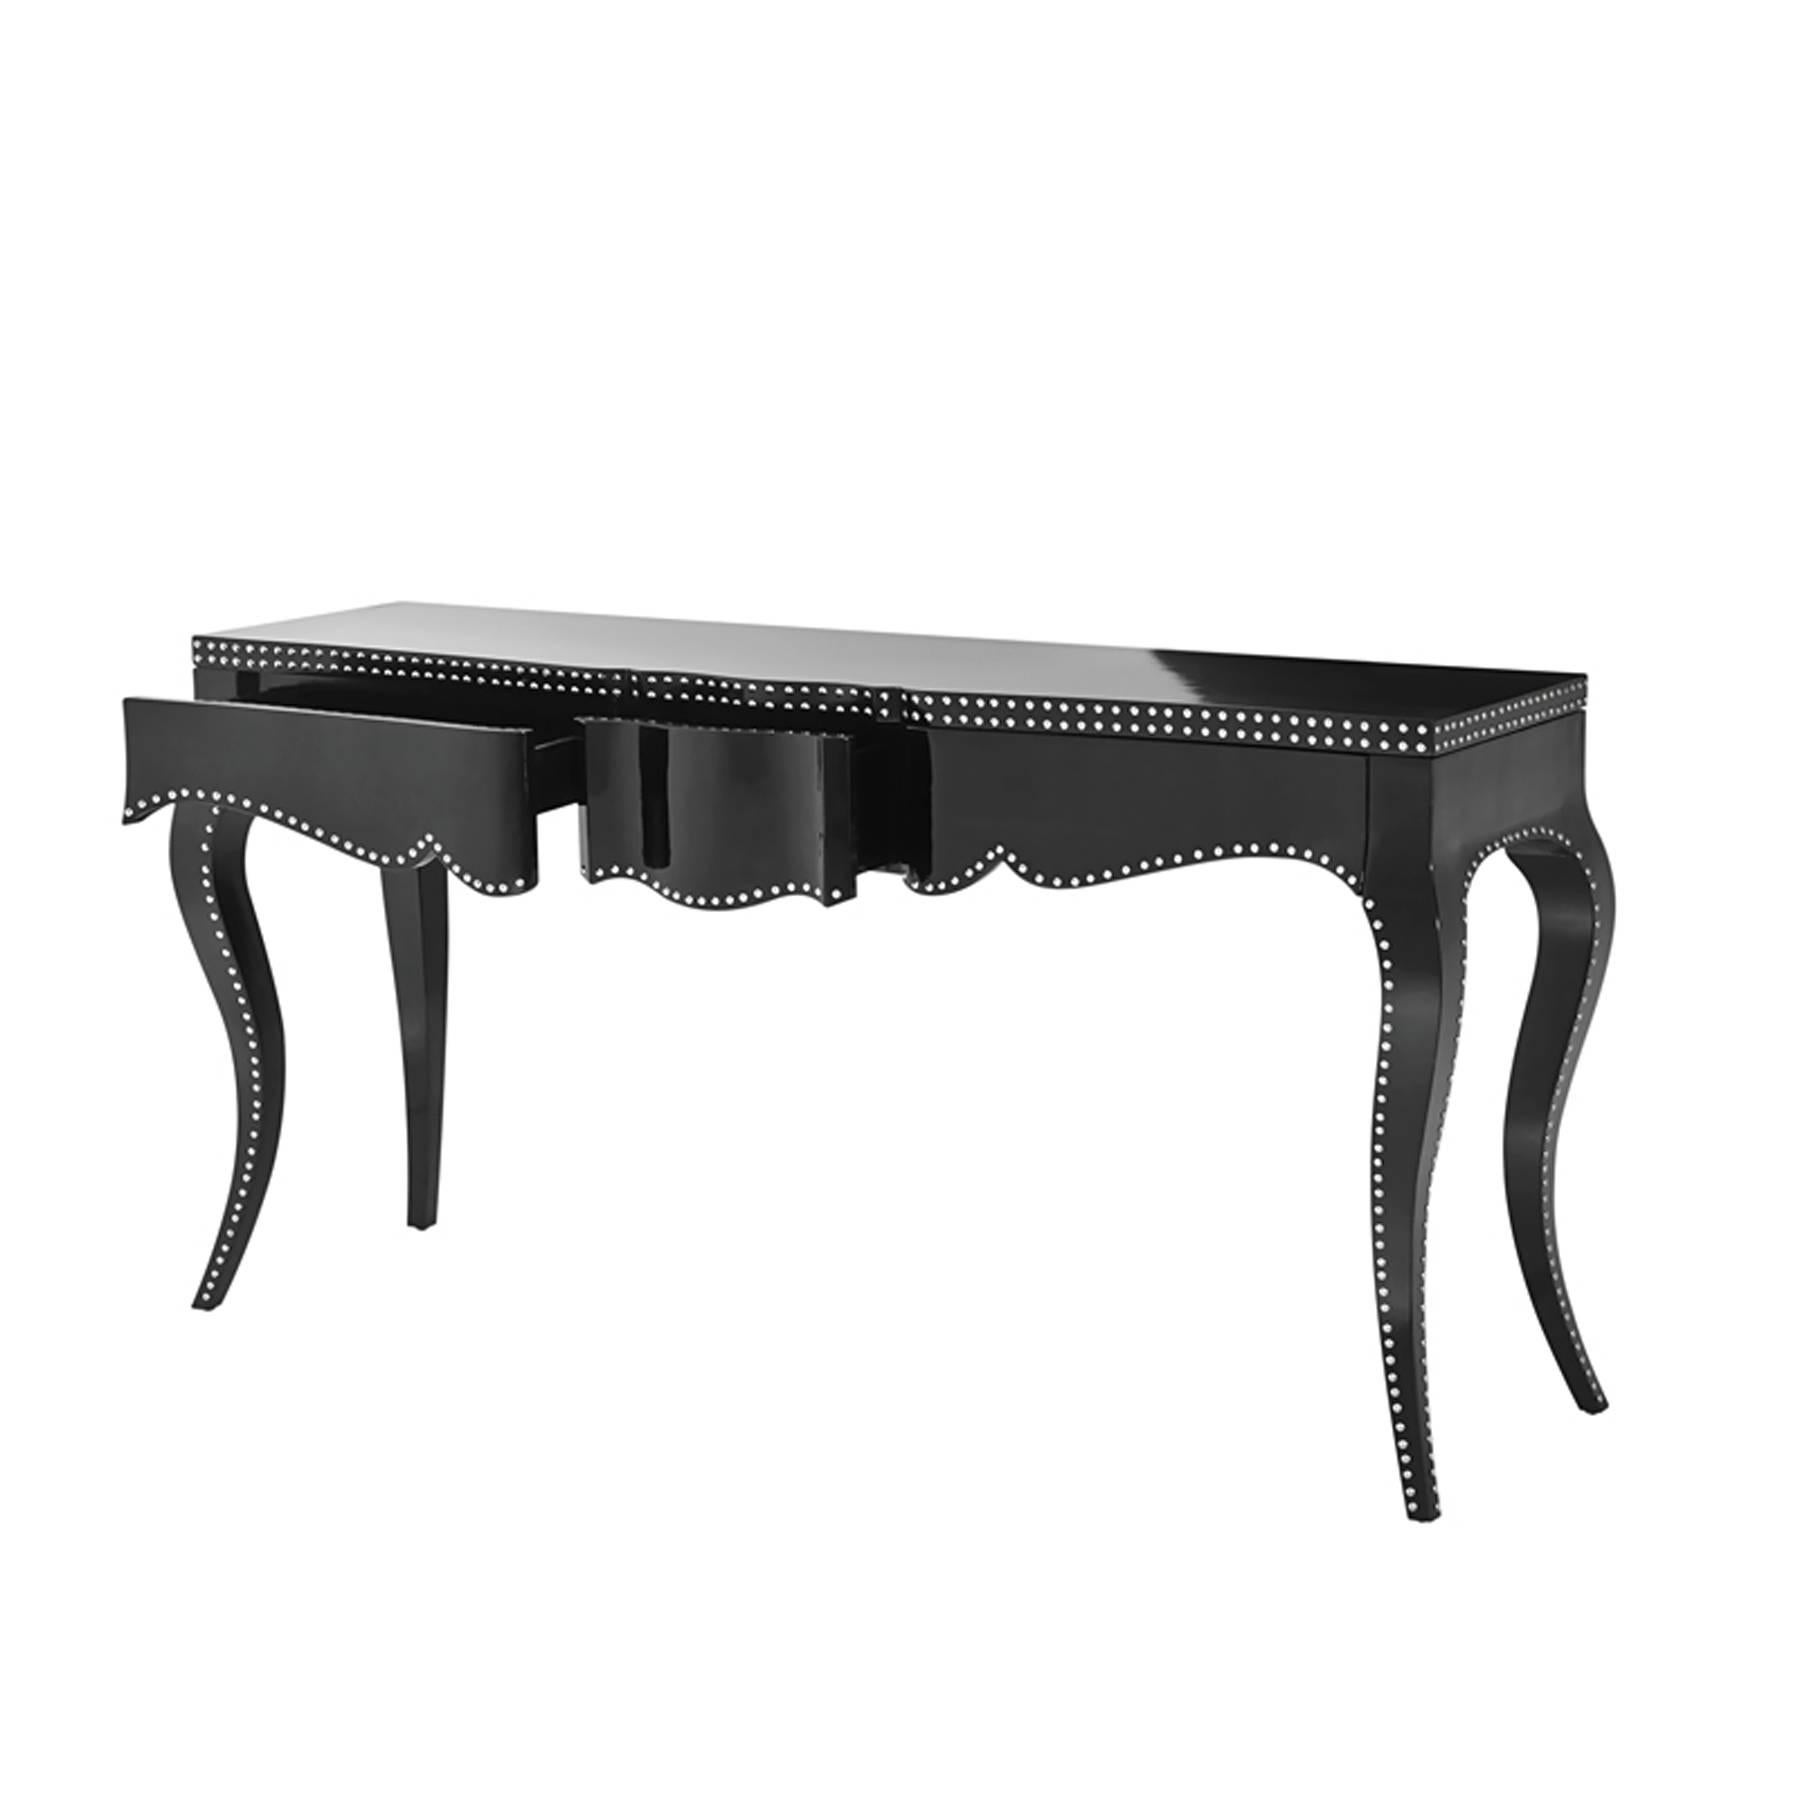 Console table Talia in black lacquered 
mahogany wood with nickel nails. 
